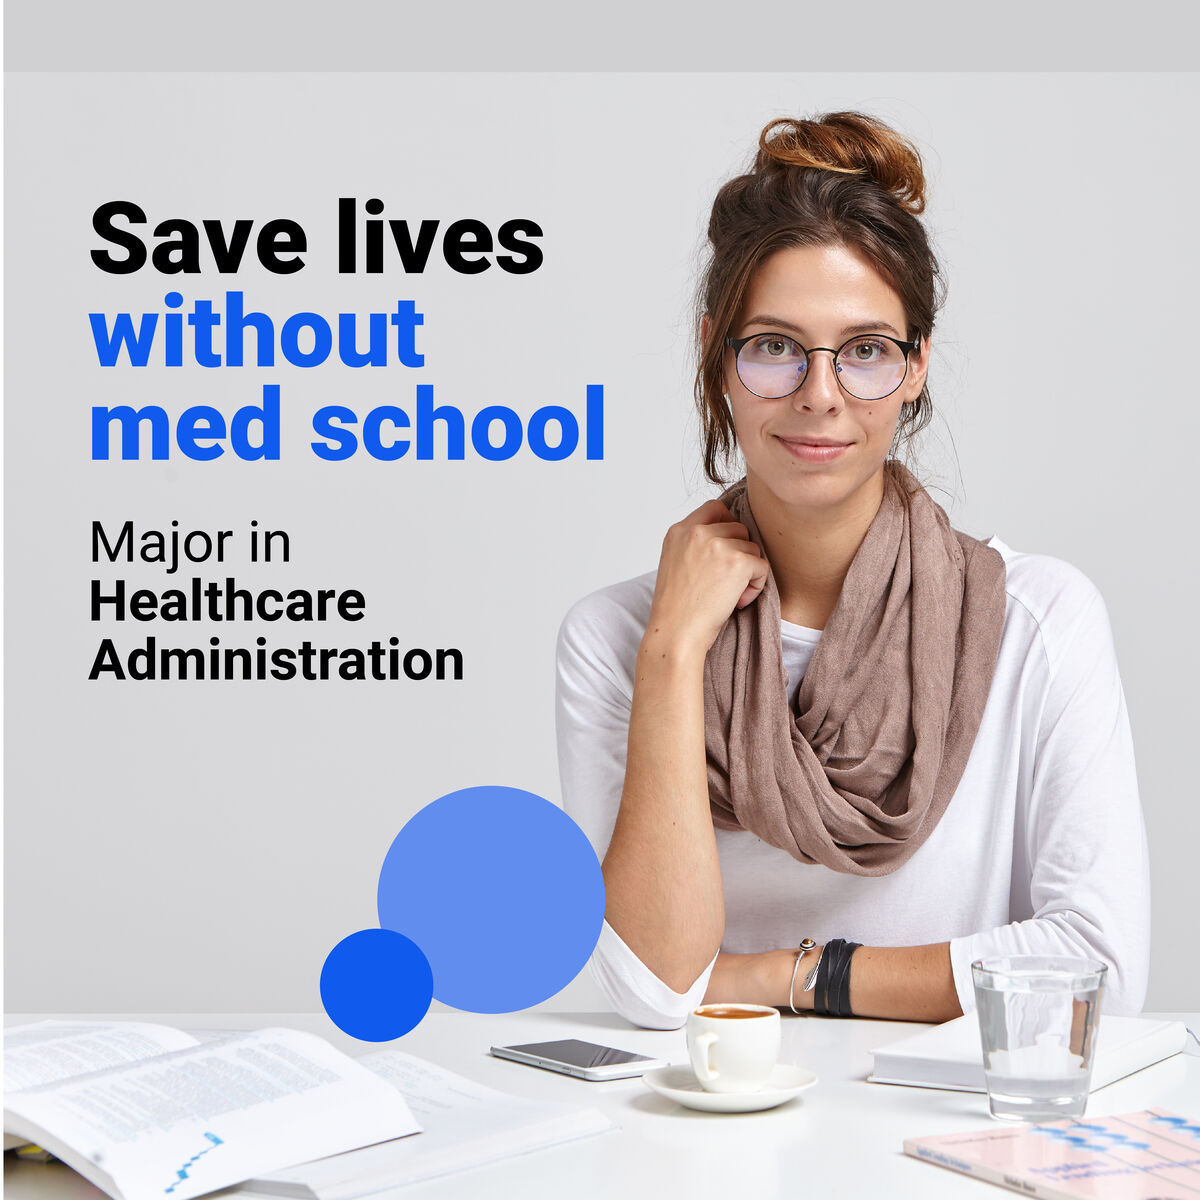 Save lives without med school